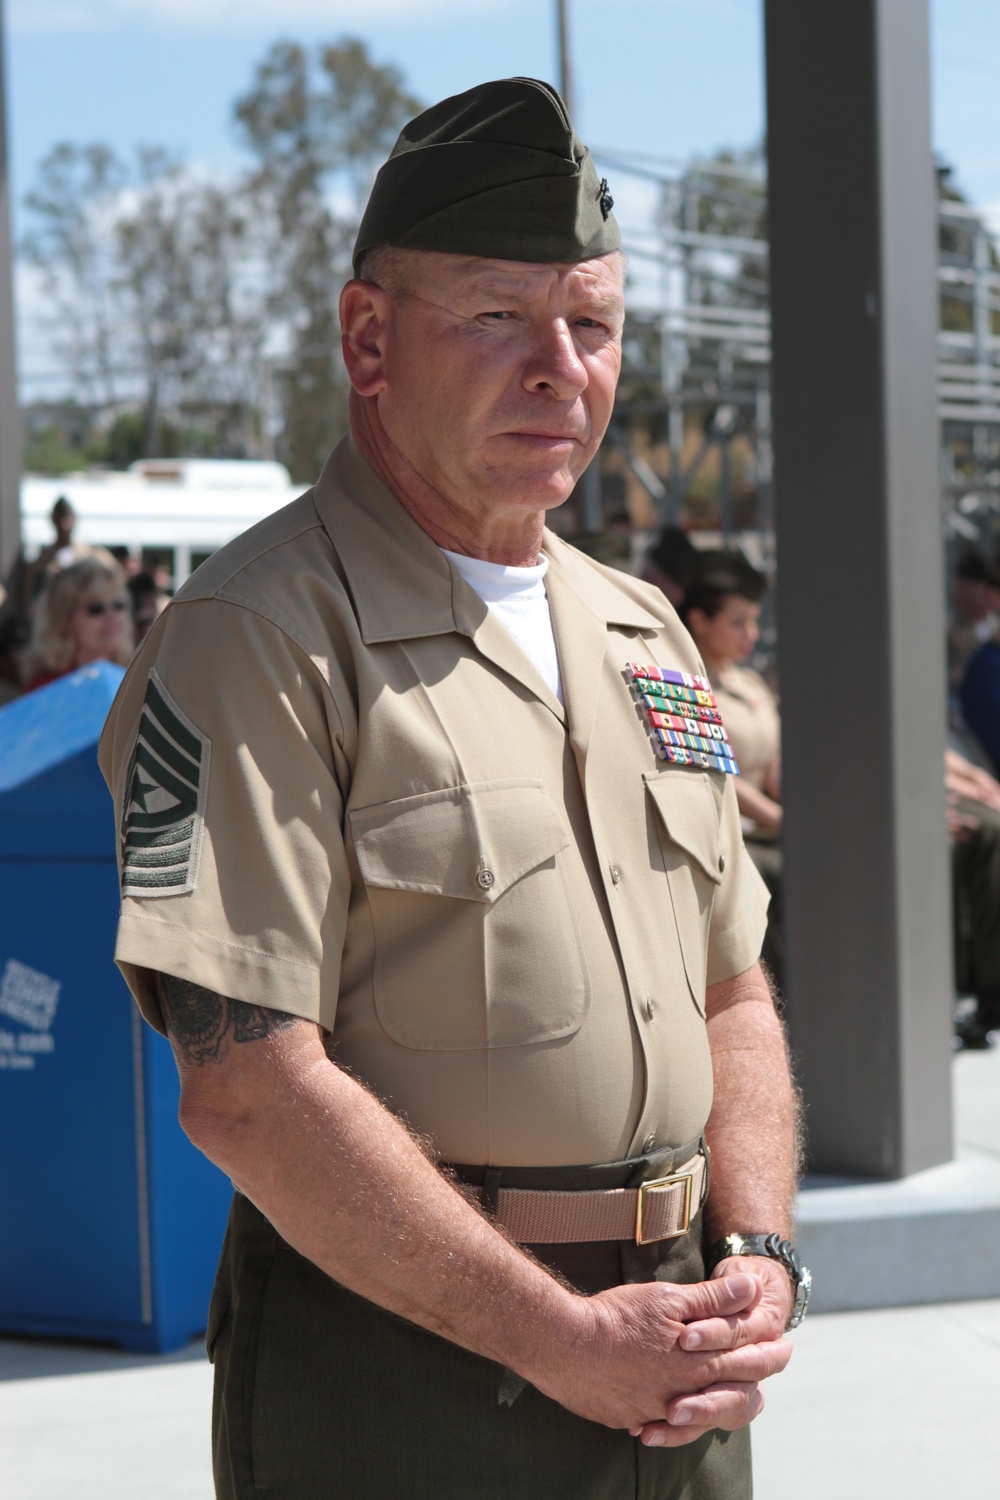 1st Marine Division receives new sergeant major